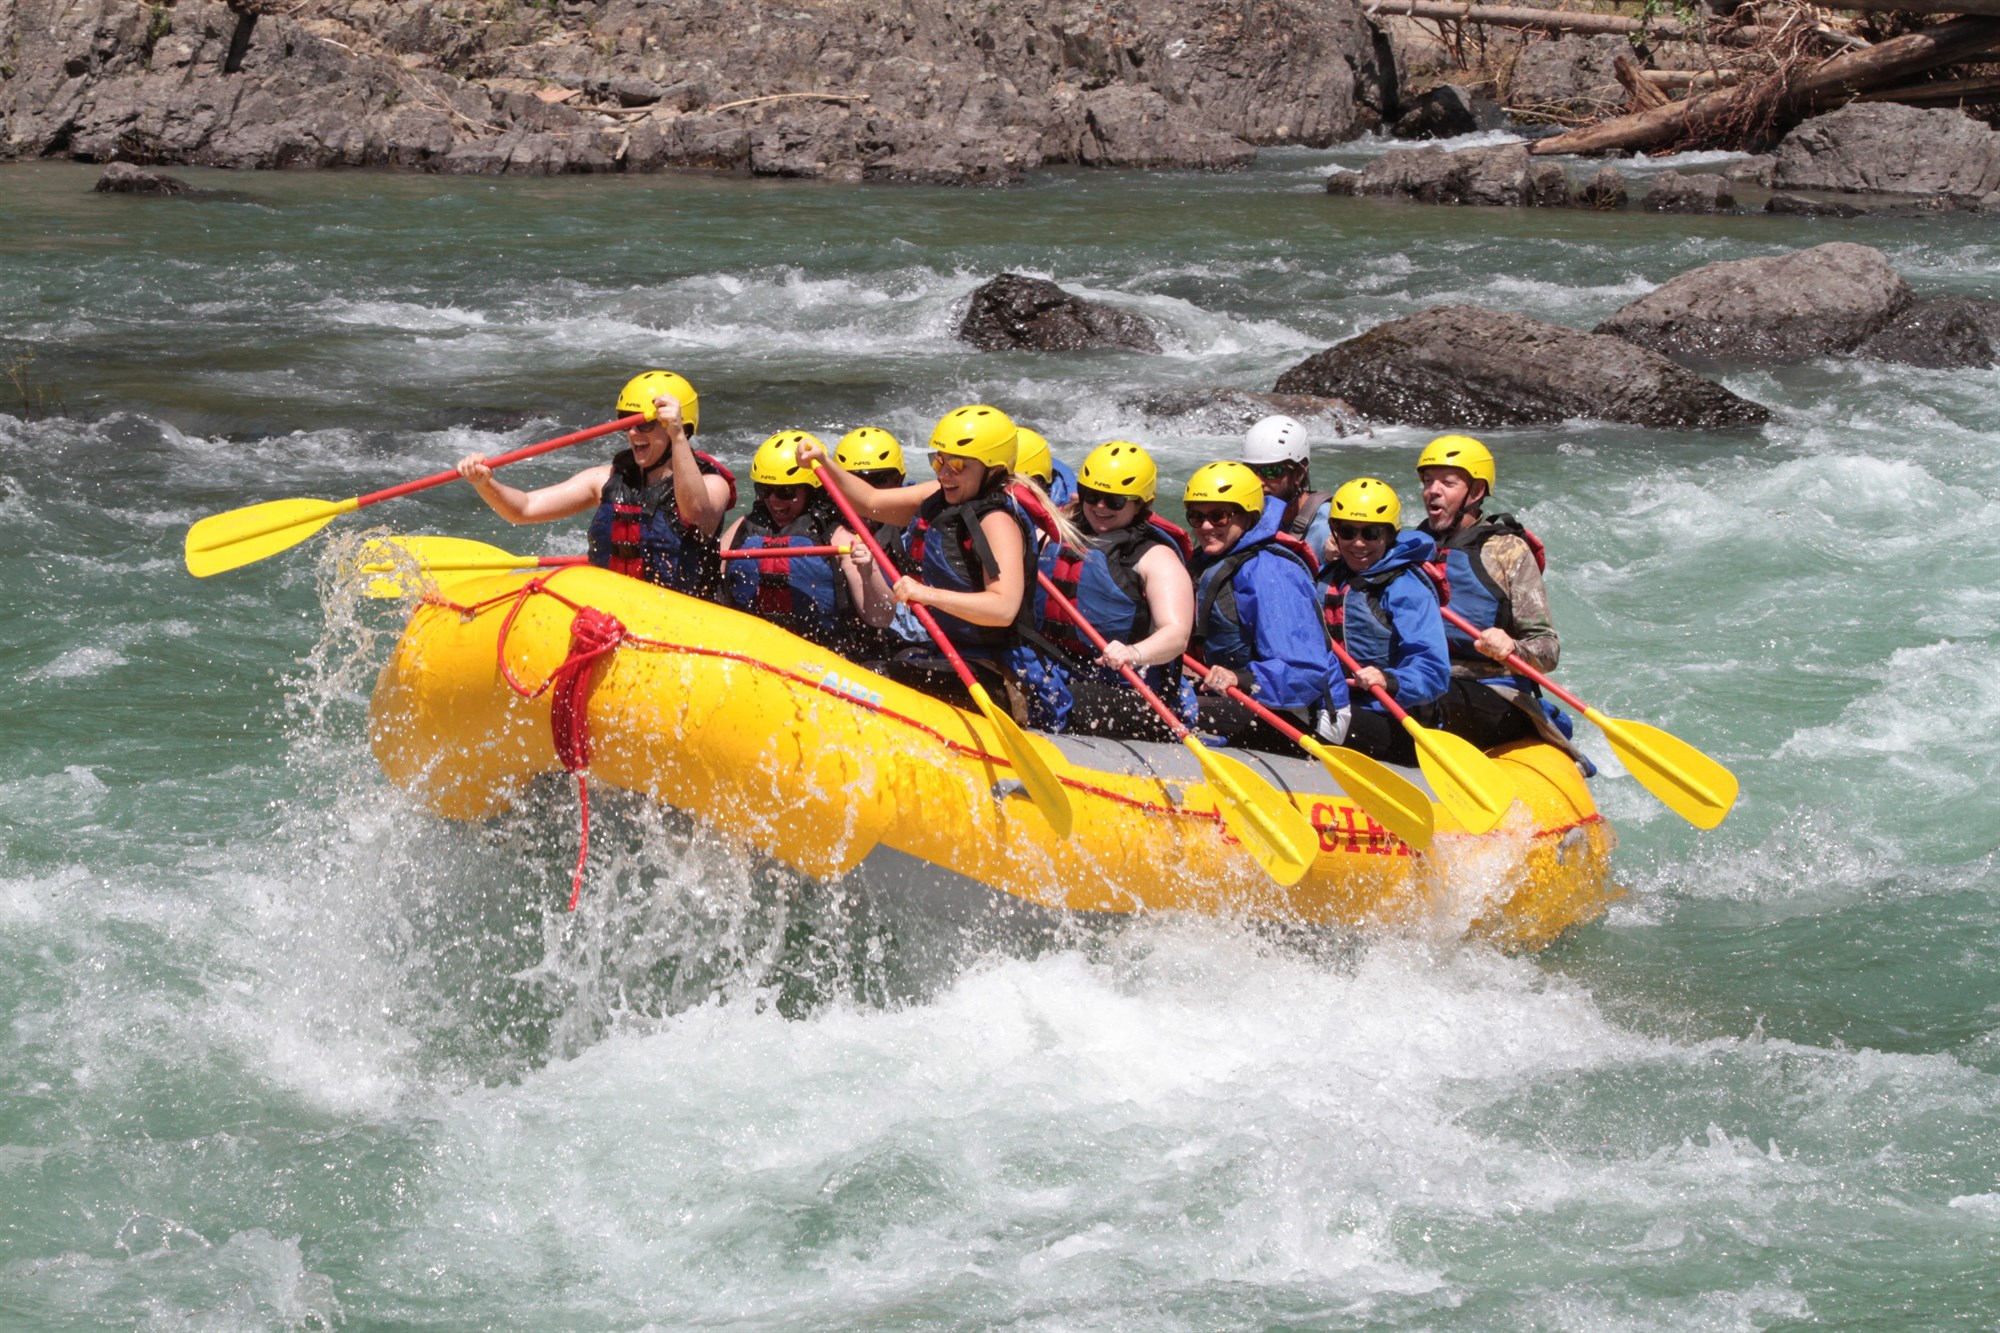 A group of people in a yellow raft navigating river rapids.